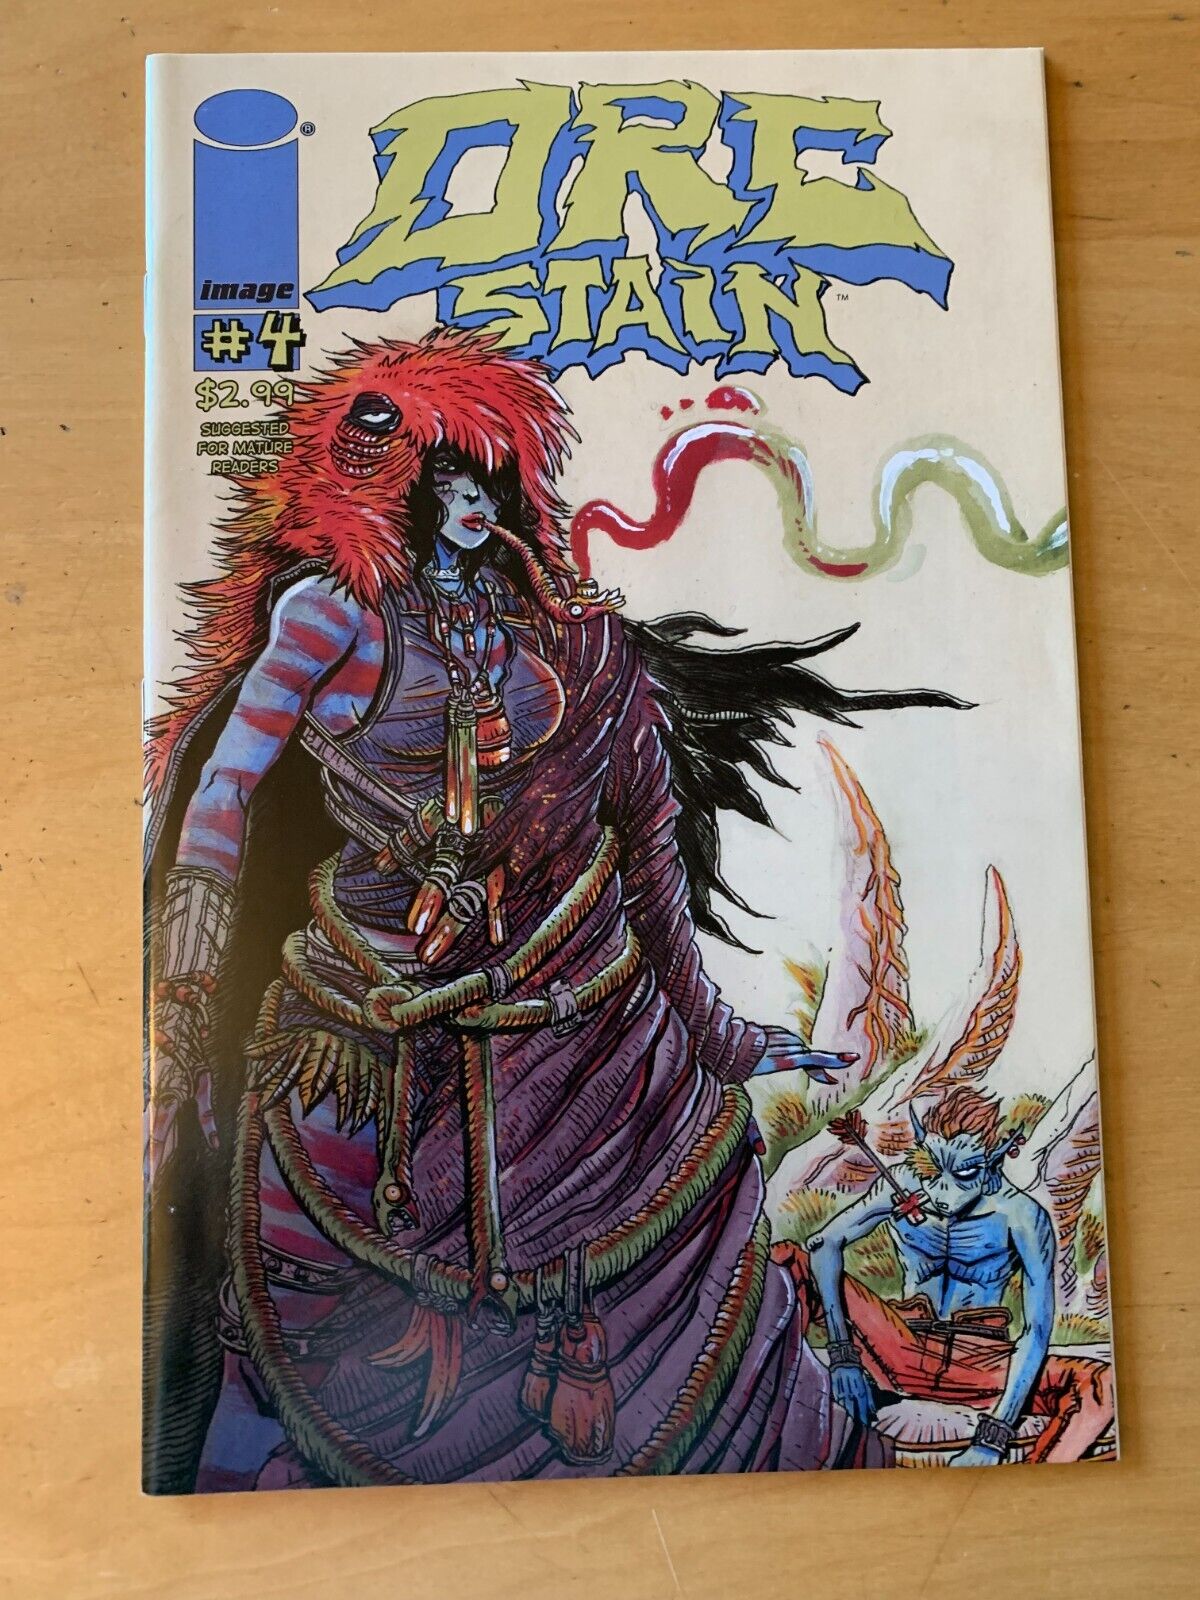 ORC STAIN 4 JAMES STOKOE DARTBLOWER COVER HIGH GRADE - SEE PICS 1ST PRINT